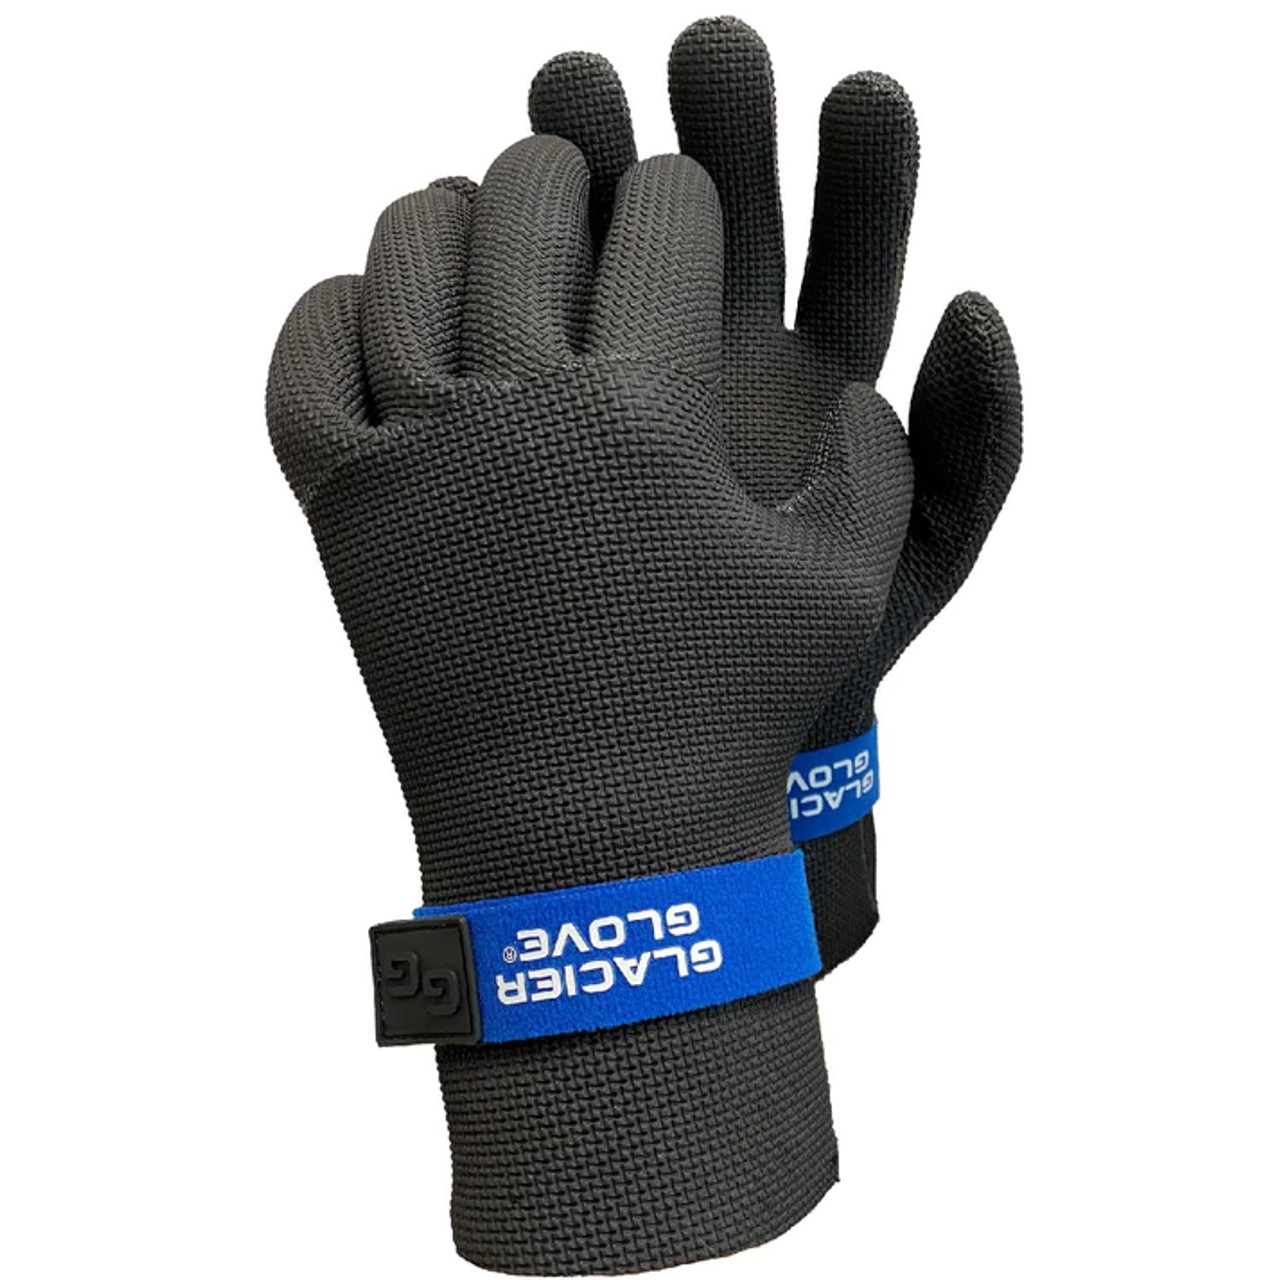 Kenai Gloves, Window Cleaning Gloves, Window Cleaning Supplies & Tools